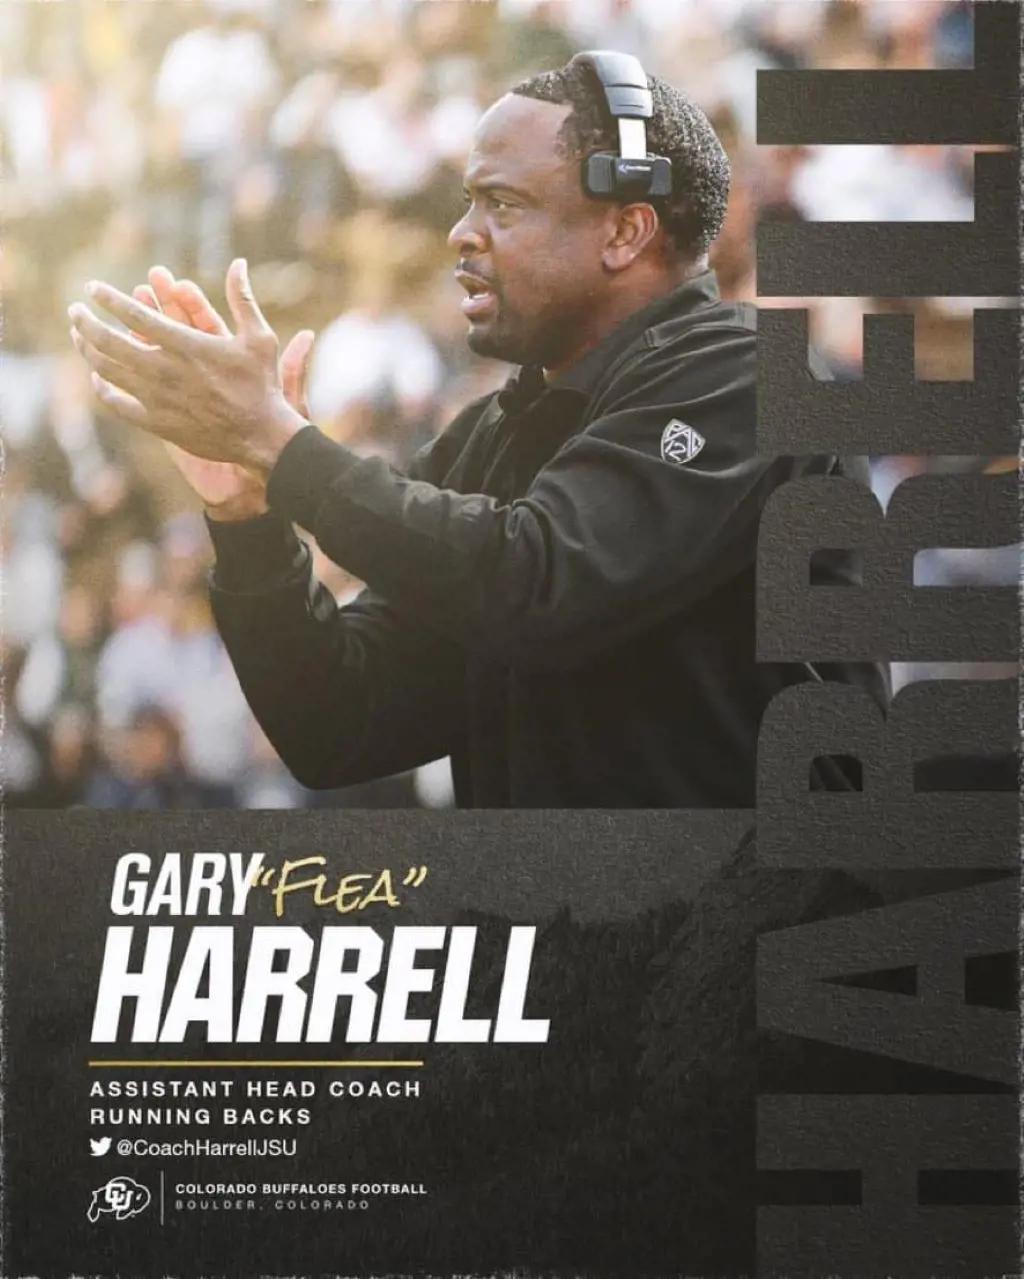 Gary Harrell coach of Colorado promoting is new job in his social media in December 2022